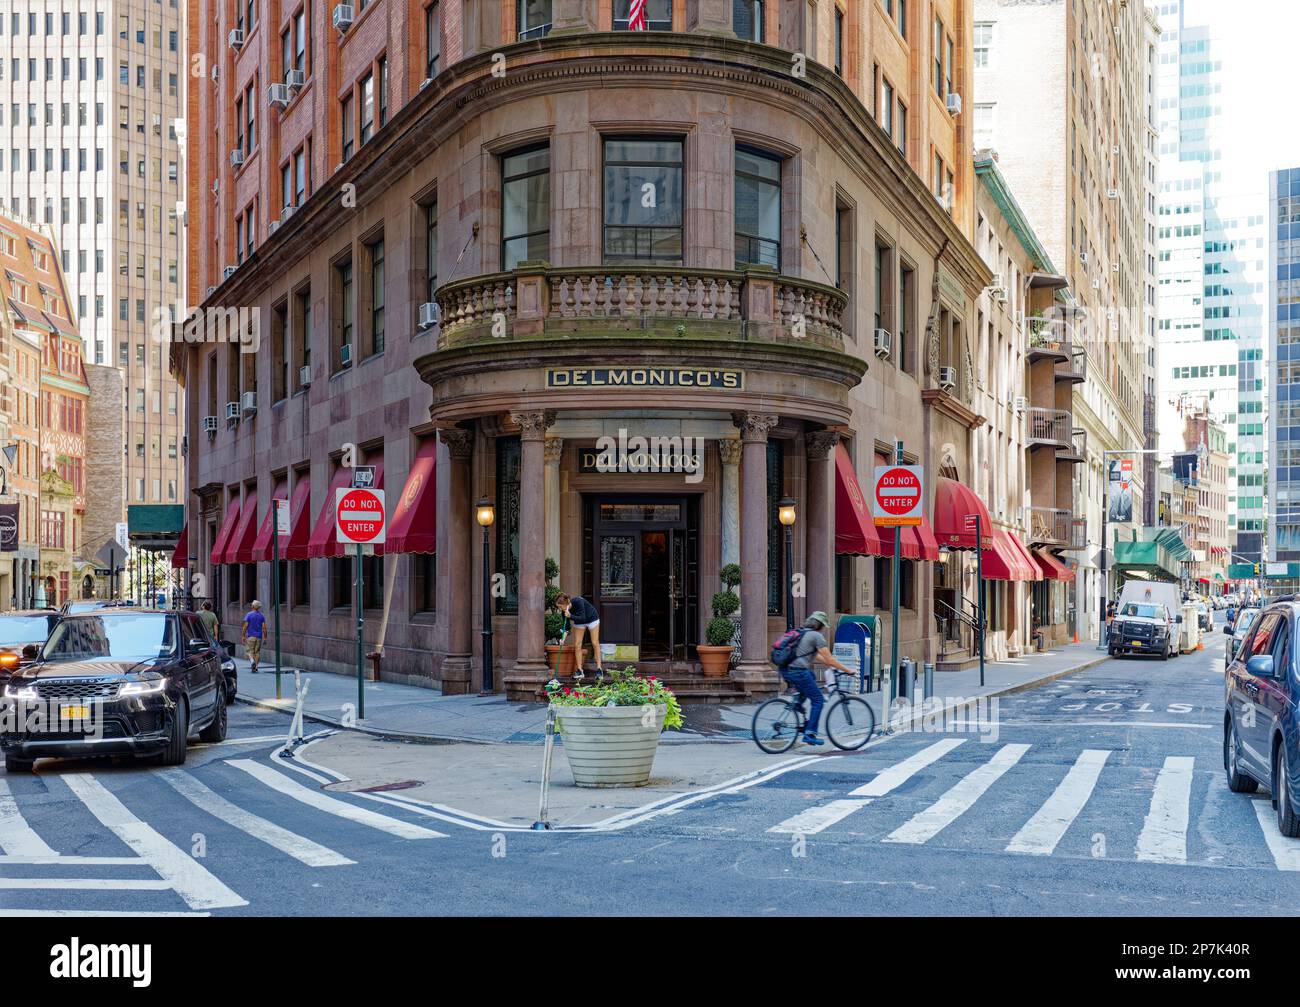 Delmonico’s restaurant occupies the base of this landmark brick, stone, and terra cotta building in the NYC Financial District. Stock Photo